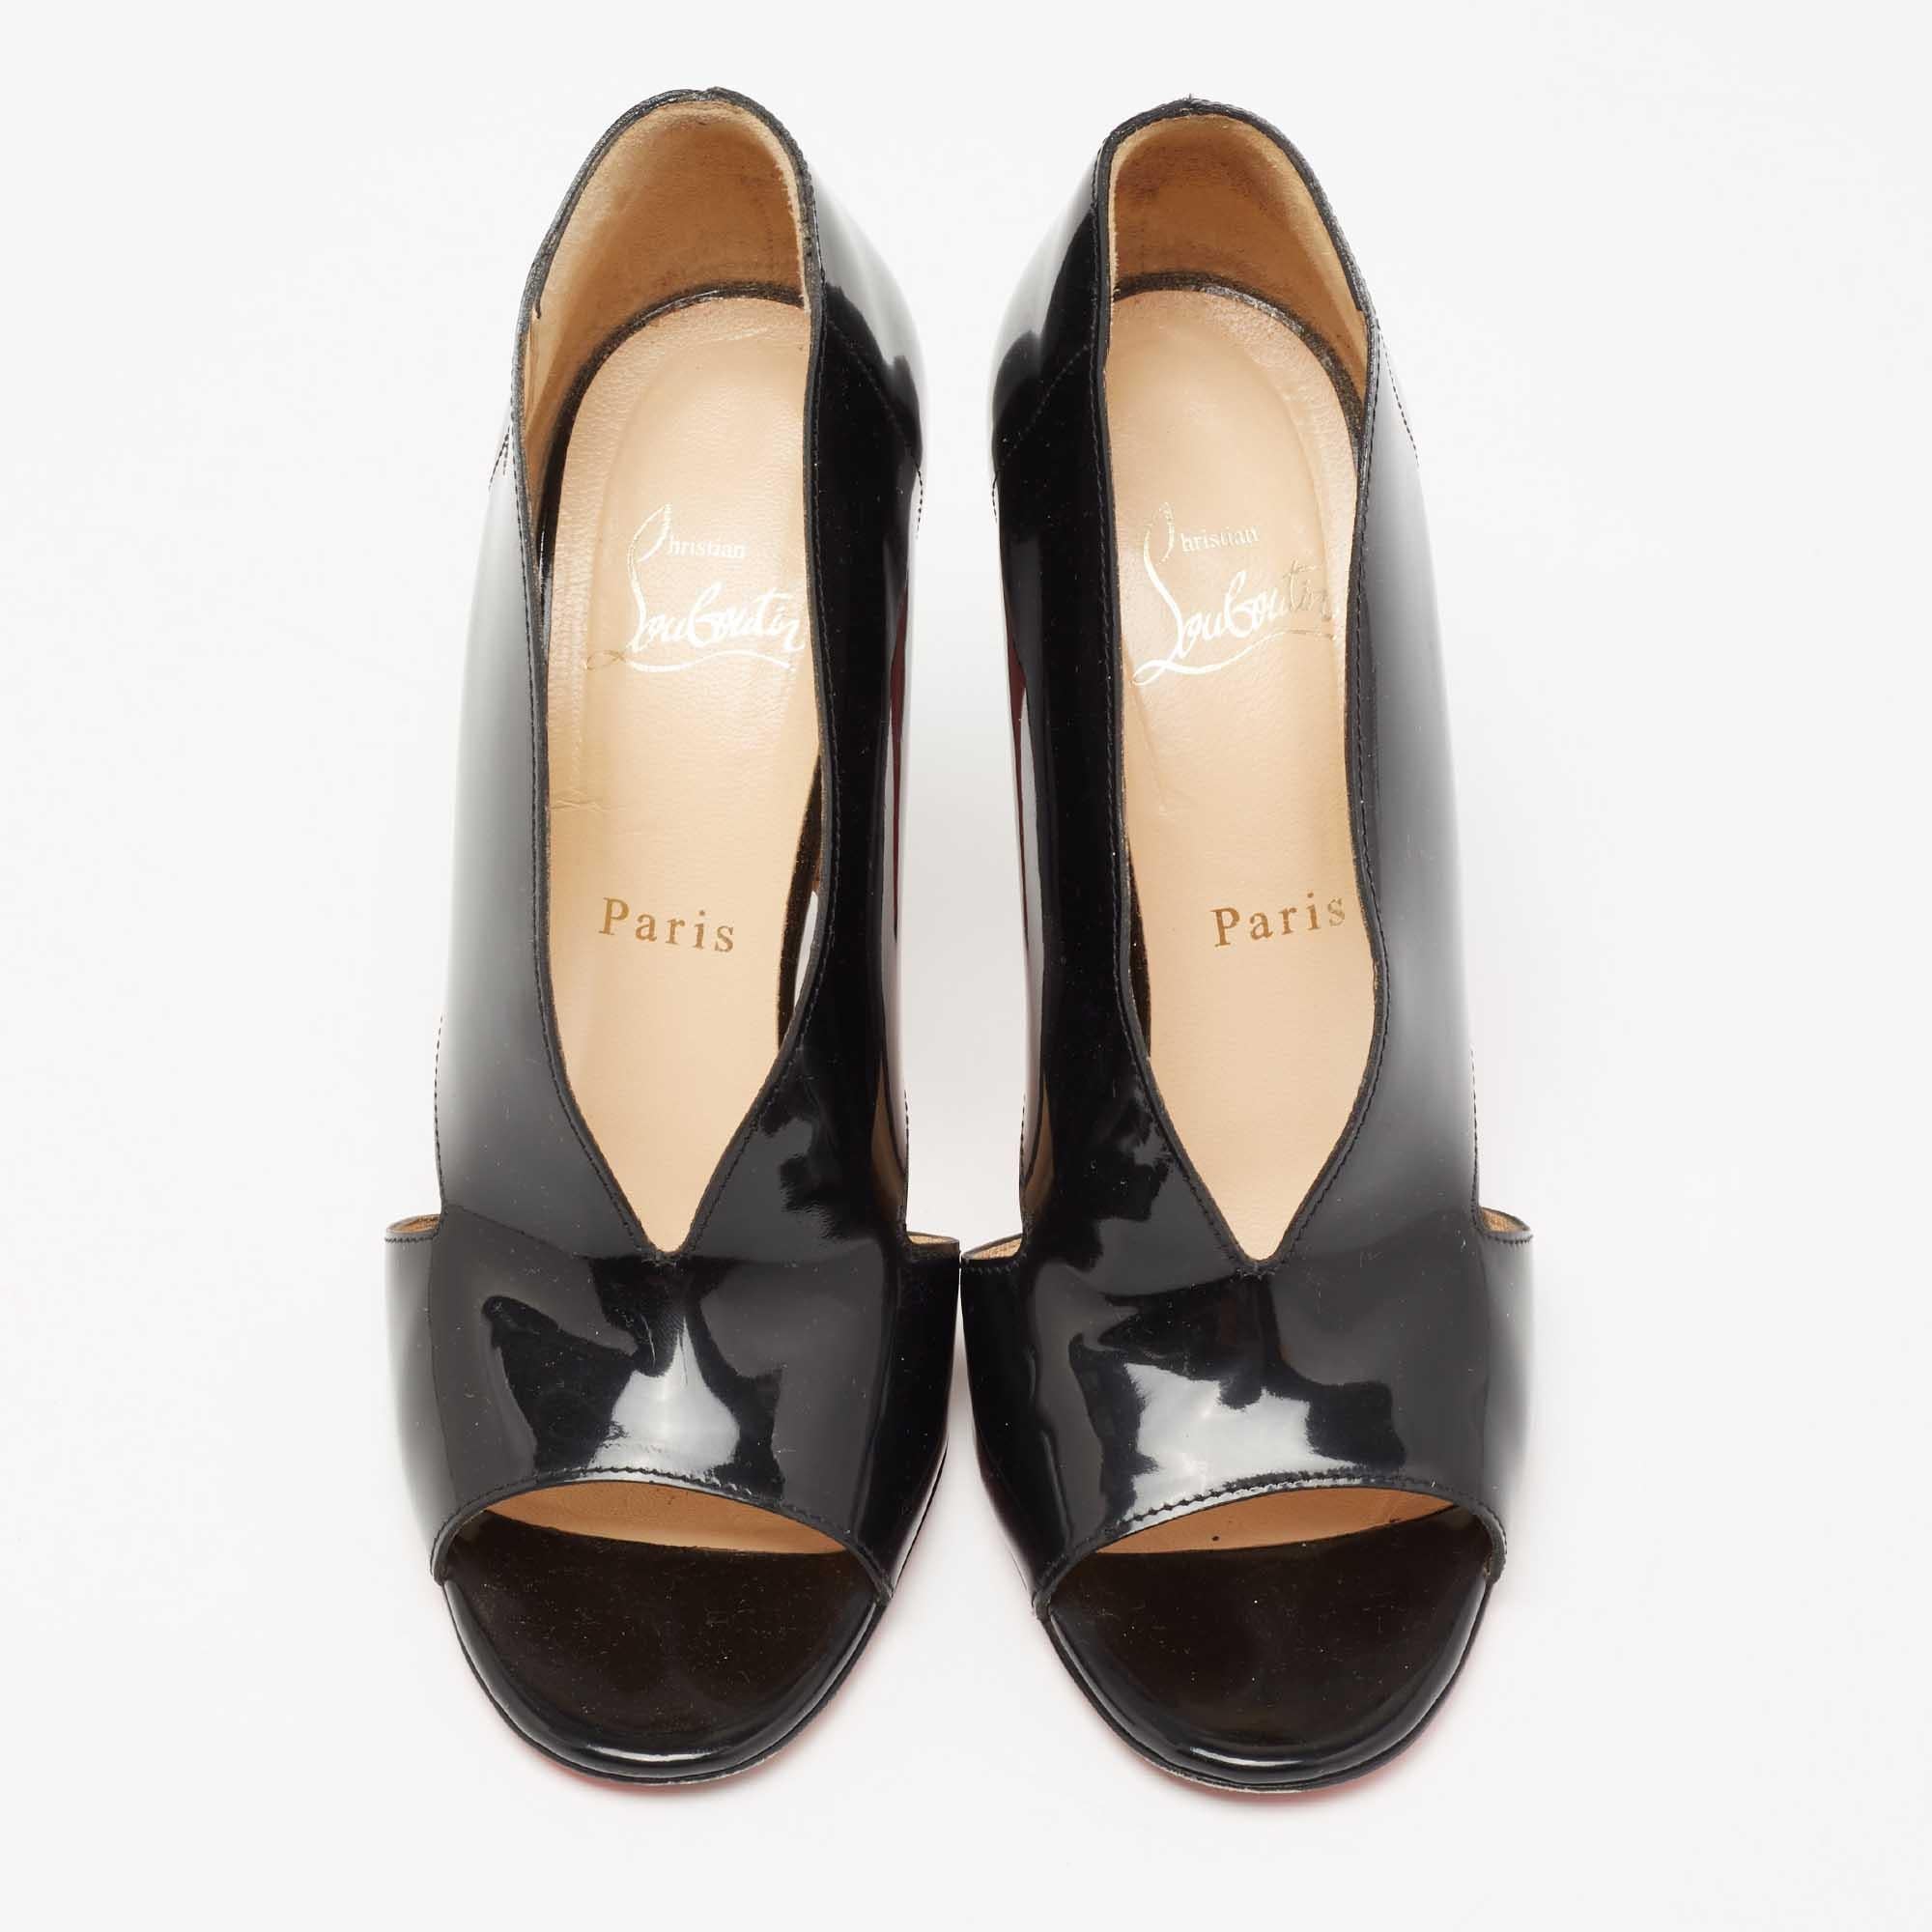 Jazz up your everyday look by flaunting these Creve Coeur pumps crafted from leather. This pair of stunning pumps by Christian Louboutin is the epitome of sophistication. A pair of gorgeous black pumps for you to make an impressive